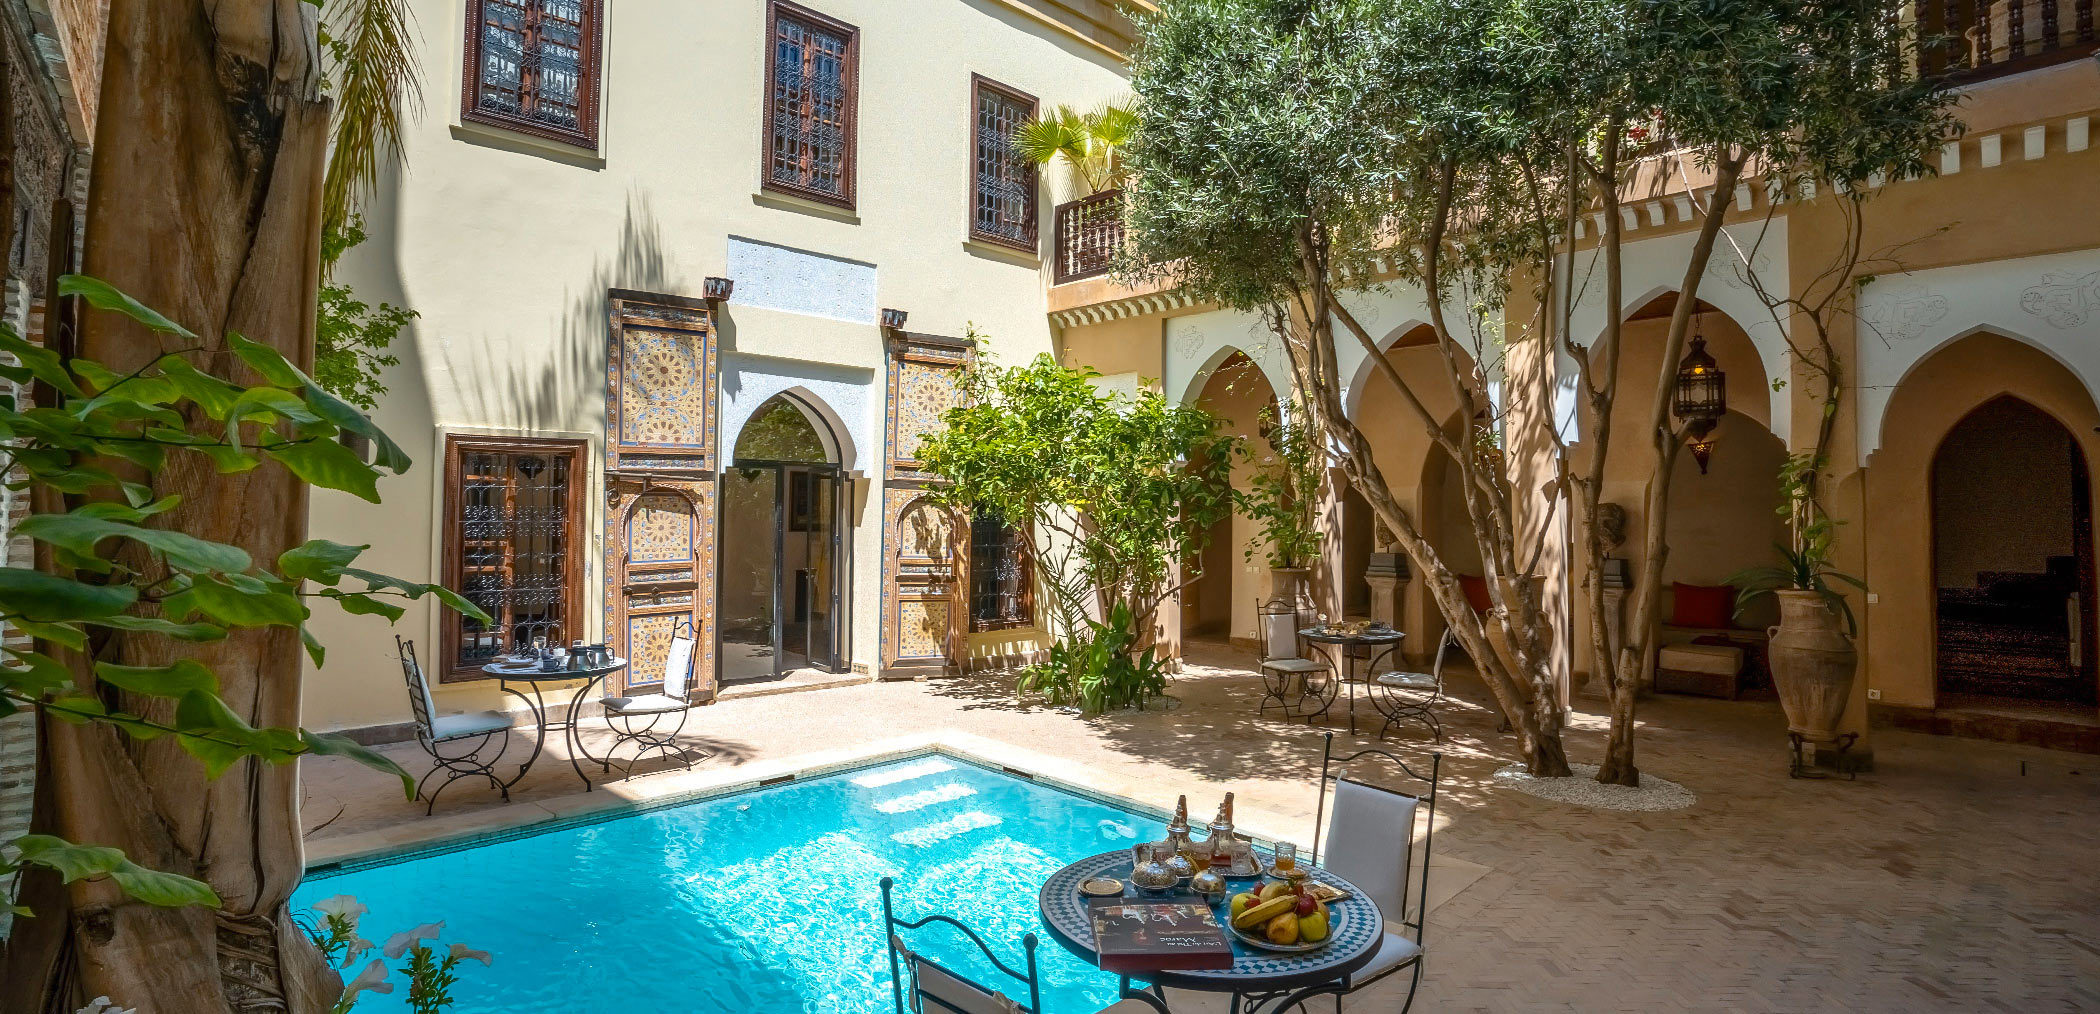 A little jewel in the hearth of the Medina